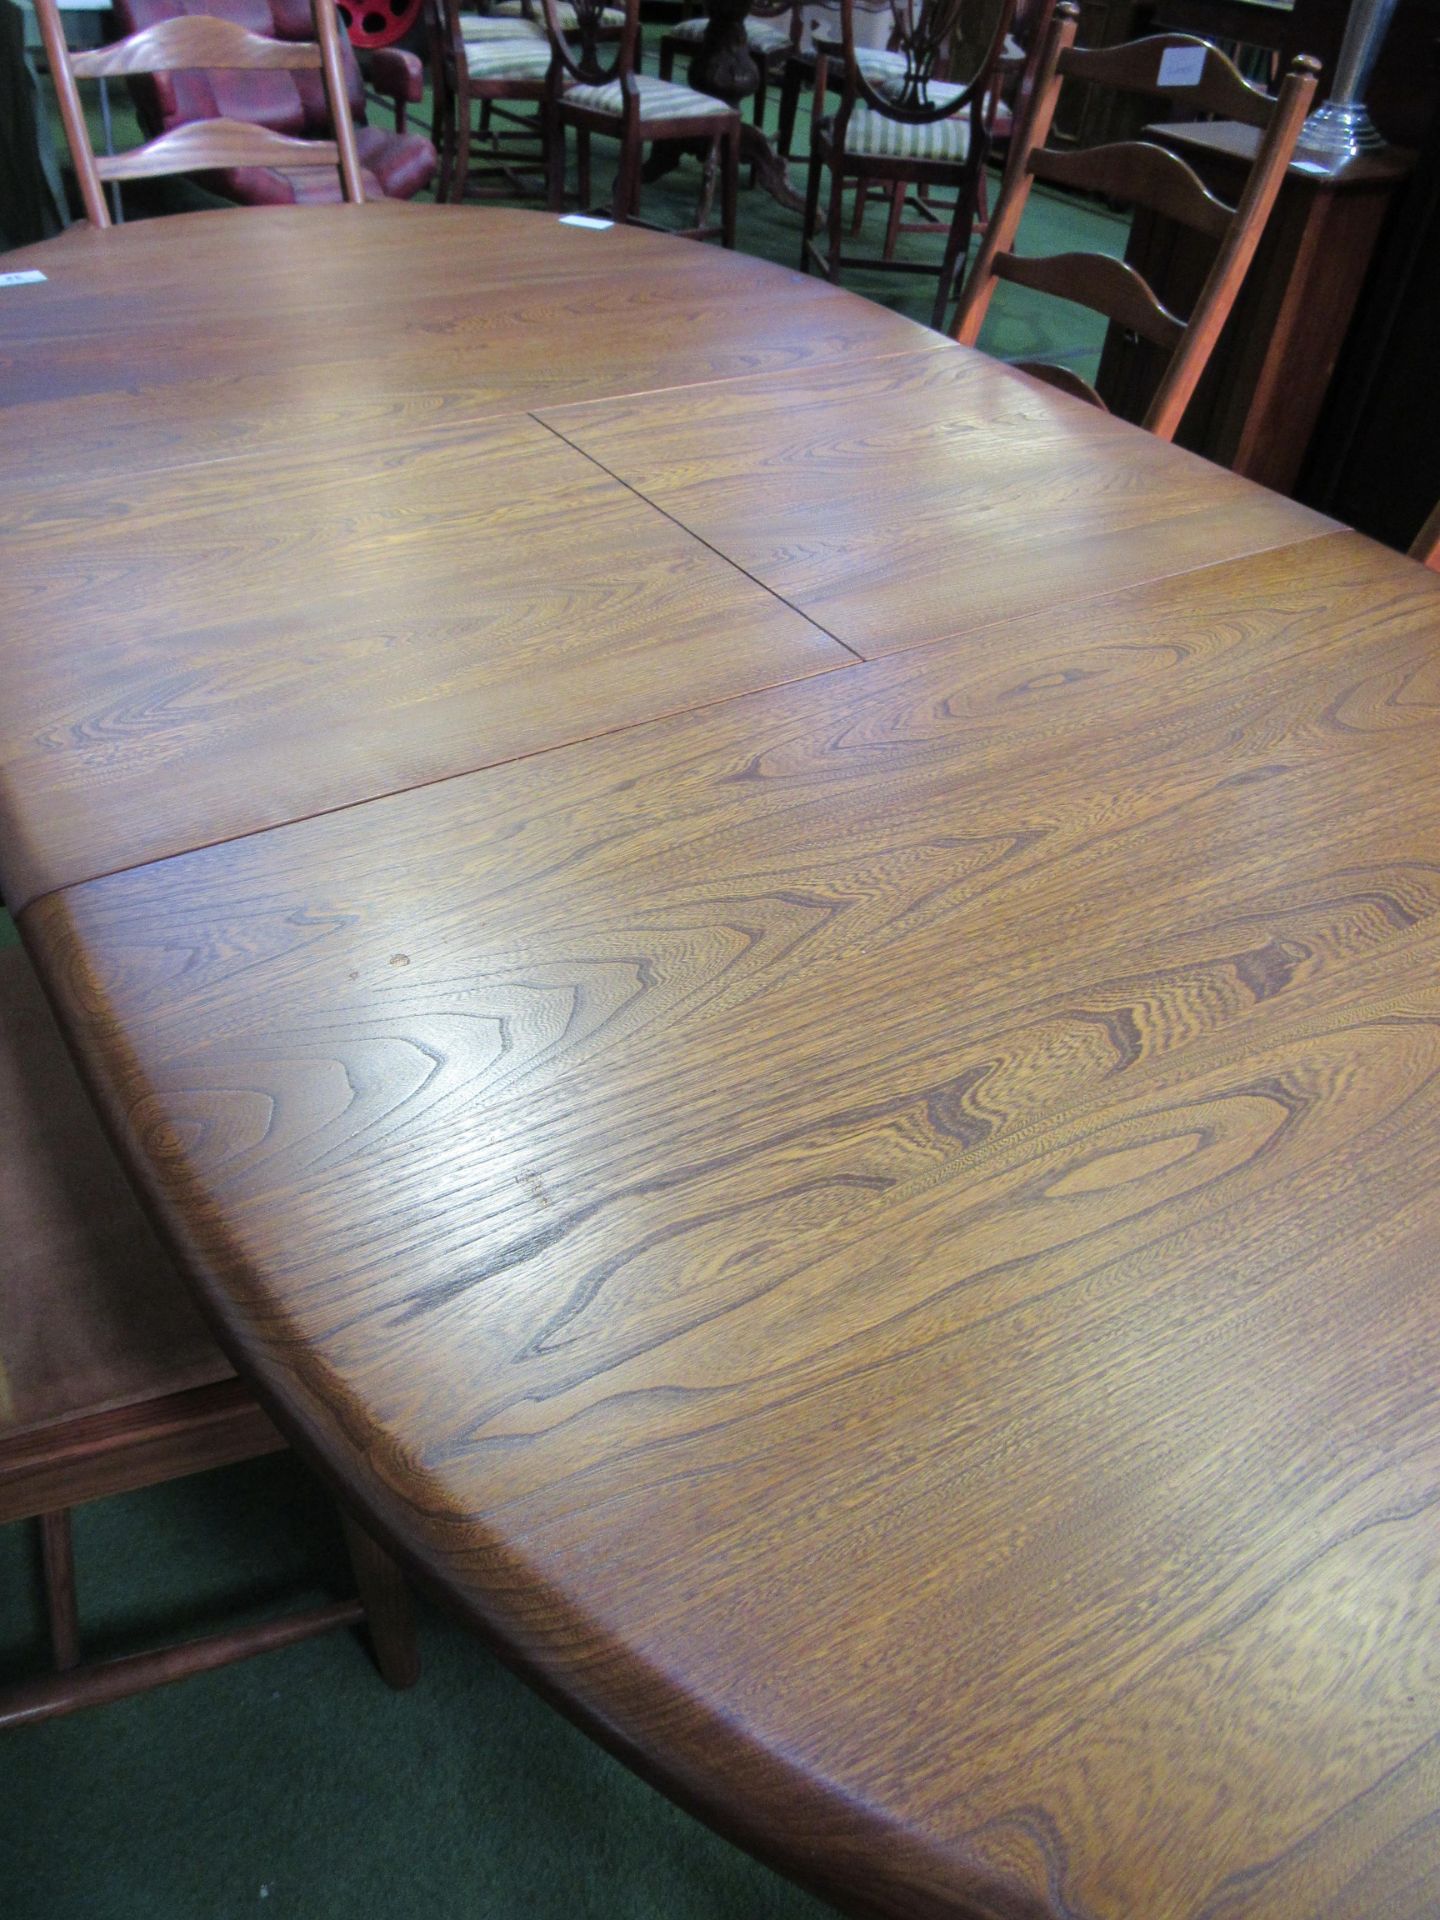 Ercol extending dining table, 212 x 108cms. Estimate £100-150. - Image 5 of 5